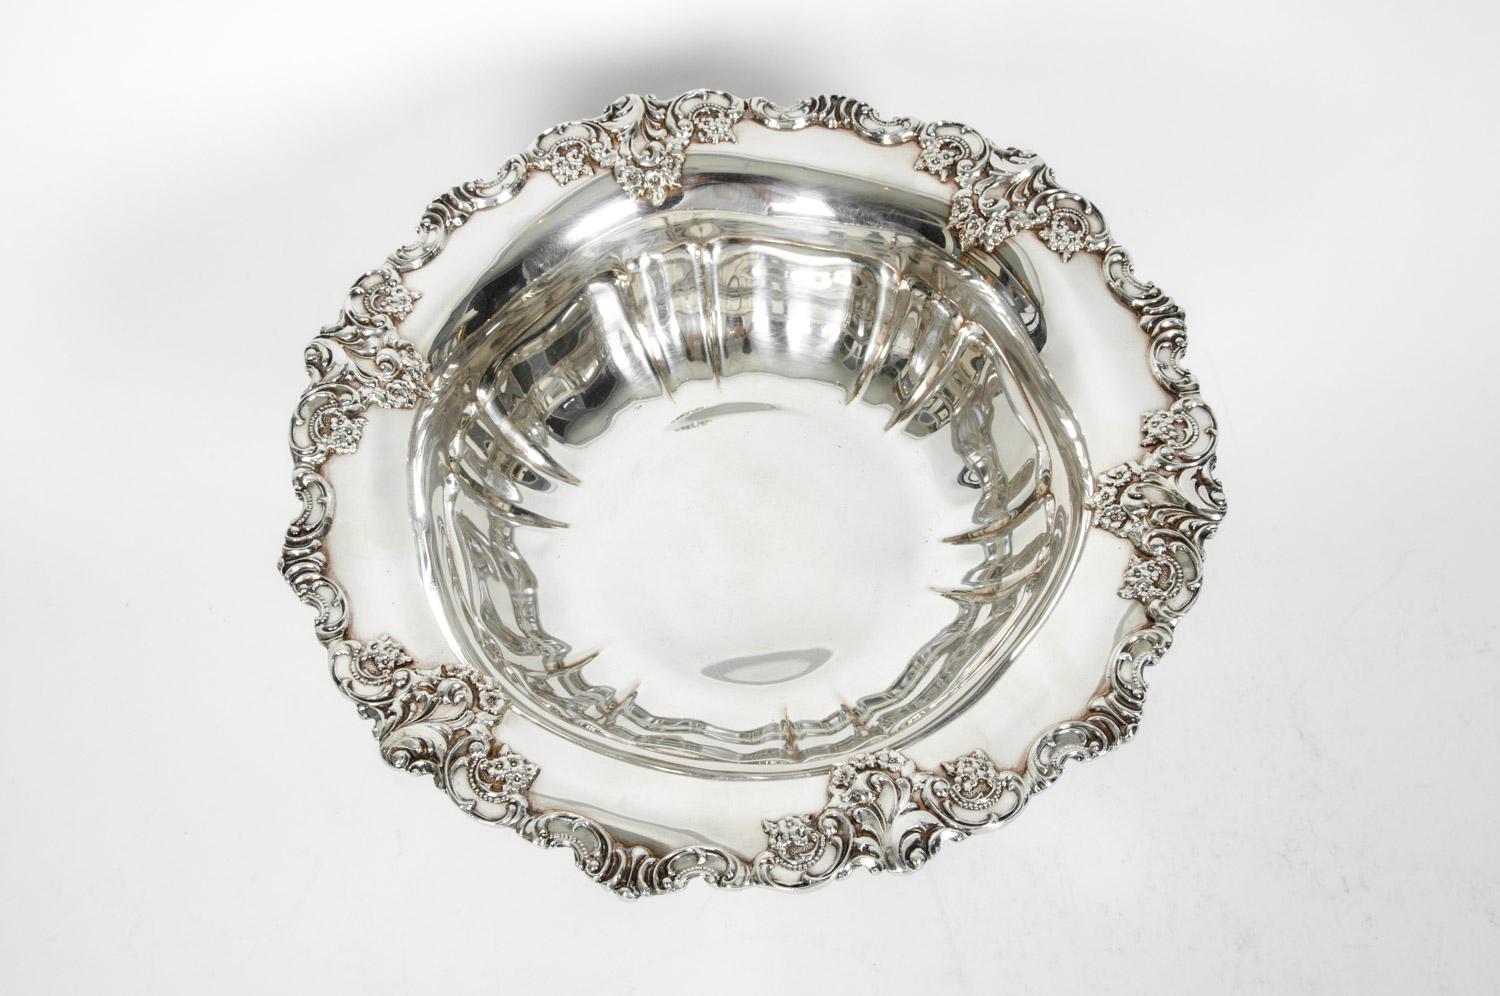 silver plated fruit bowl